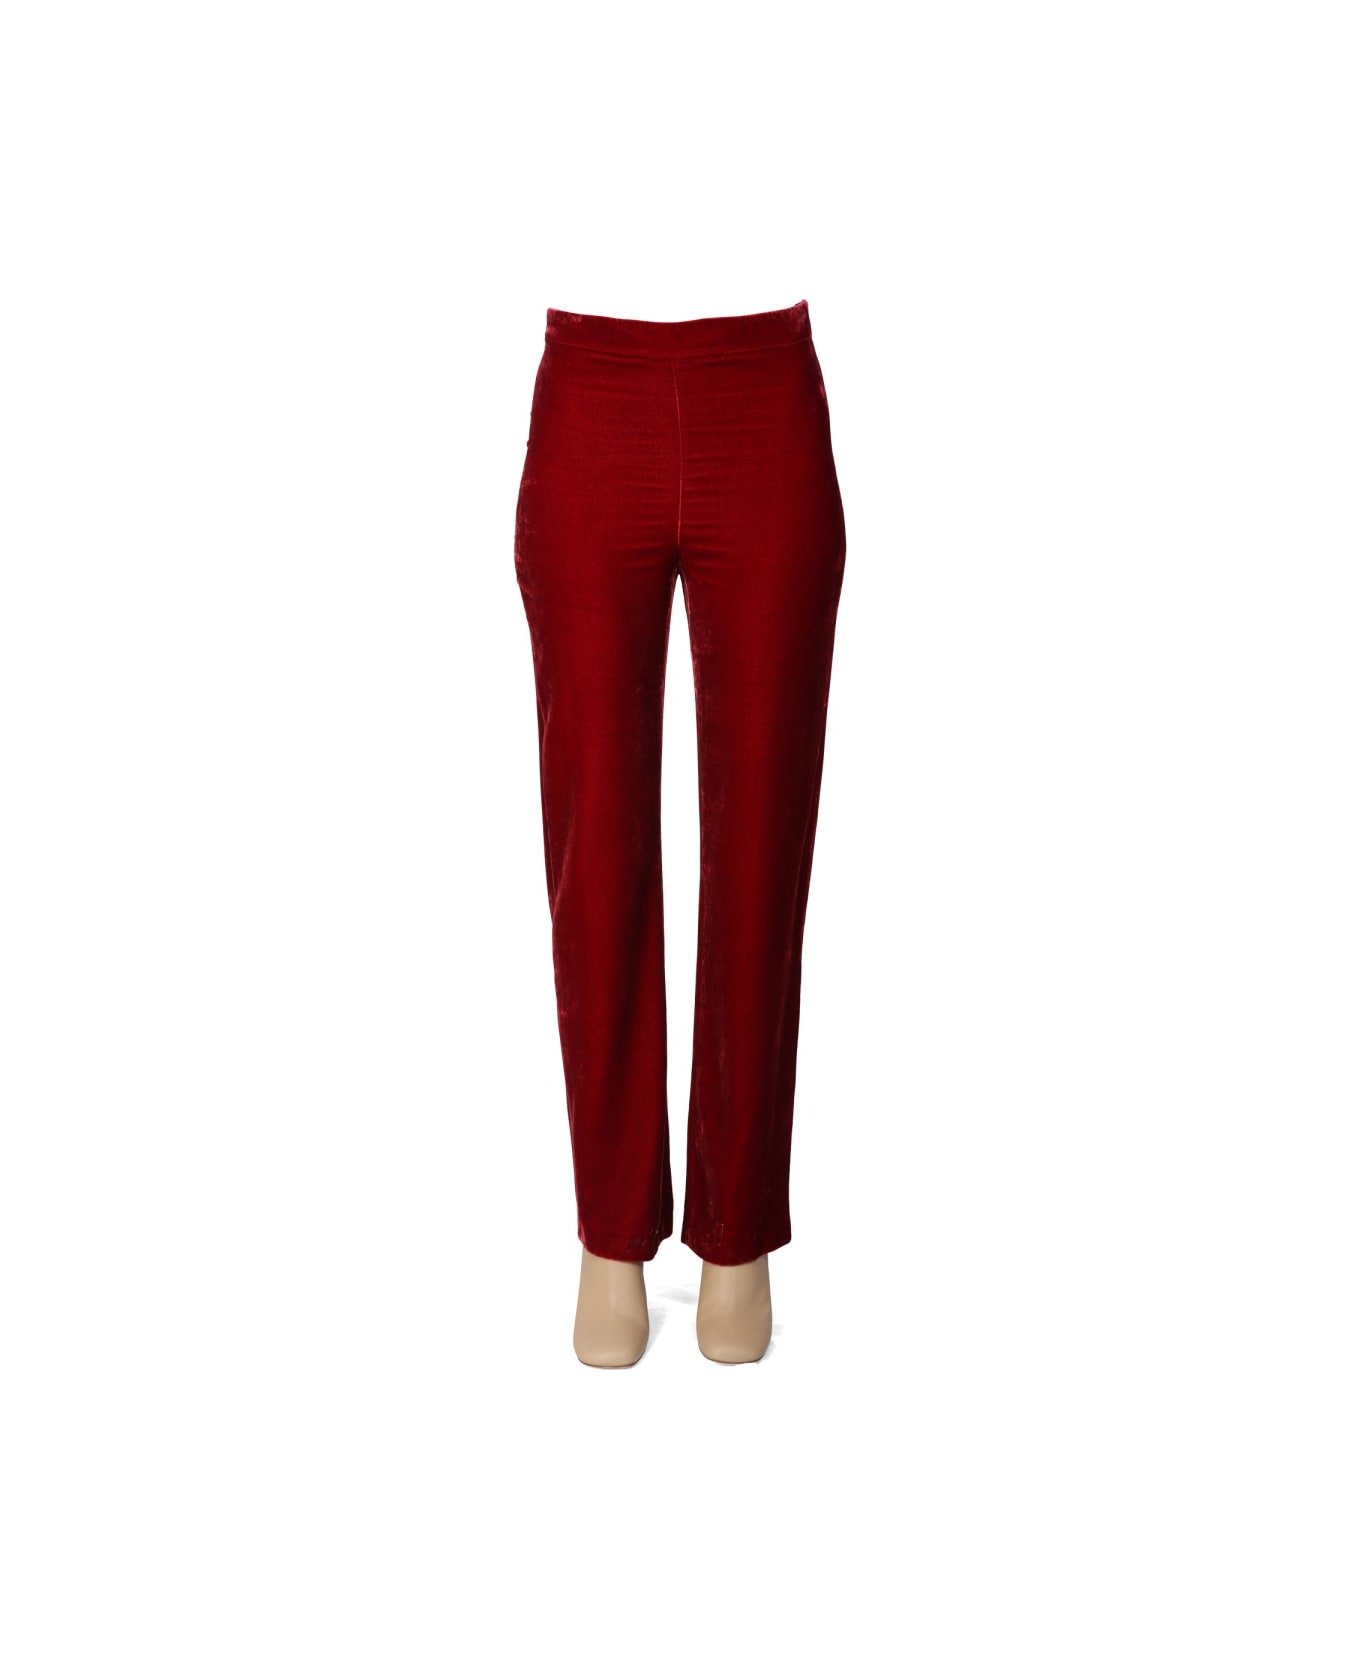 Boutique Moschino Panné Velvet Pants - RED